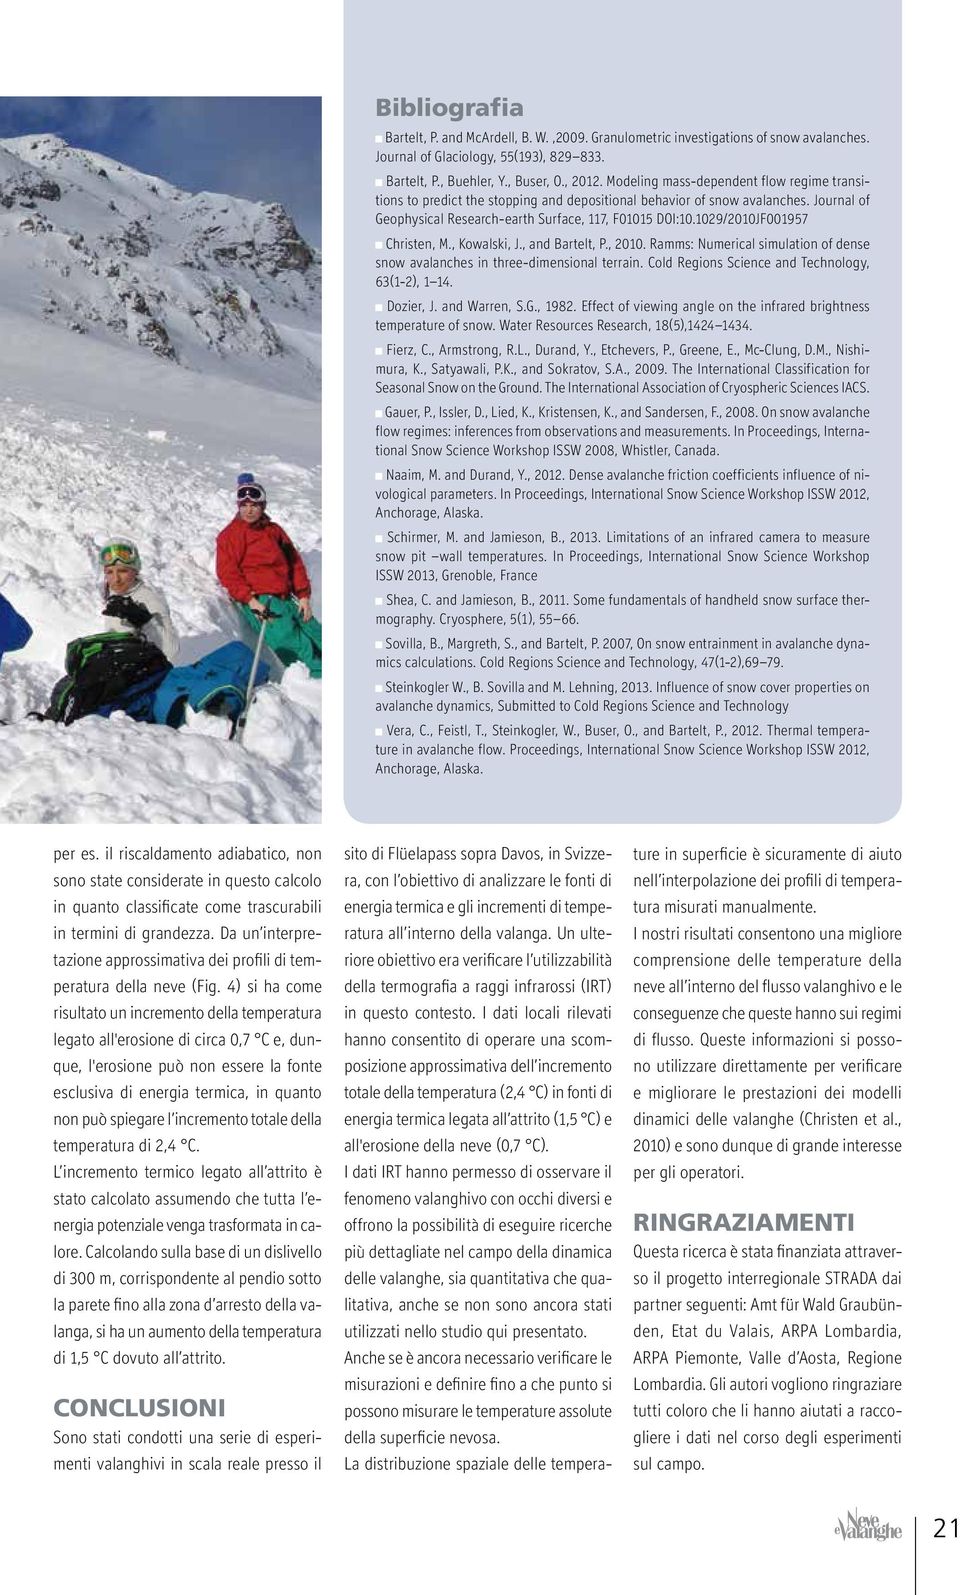 1029/2010JF001957 Christen, M., Kowalski, J., and Bartelt, P., 2010. Ramms: Numerical simulation of dense snow avalanches in three-dimensional terrain.